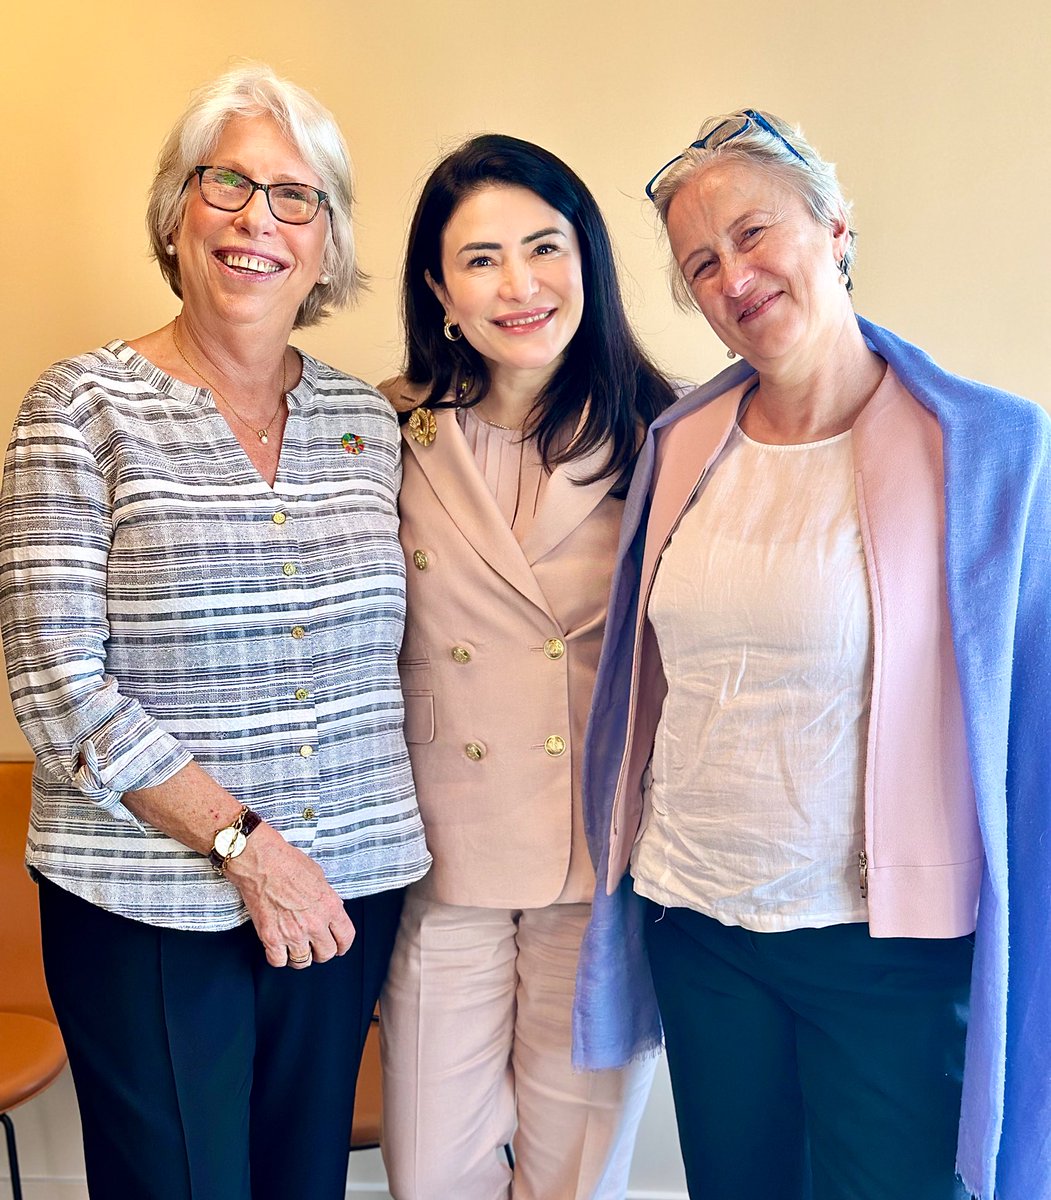 Today marked the final meeting of the Pathfinders' Member States with Sarah Cliffe & Karina Gerlach at the helm. Their visionary leadership & substantive contributions have been invaluable. Wishing them both the very best in their future endeavors! #Pathfinders #SDG16